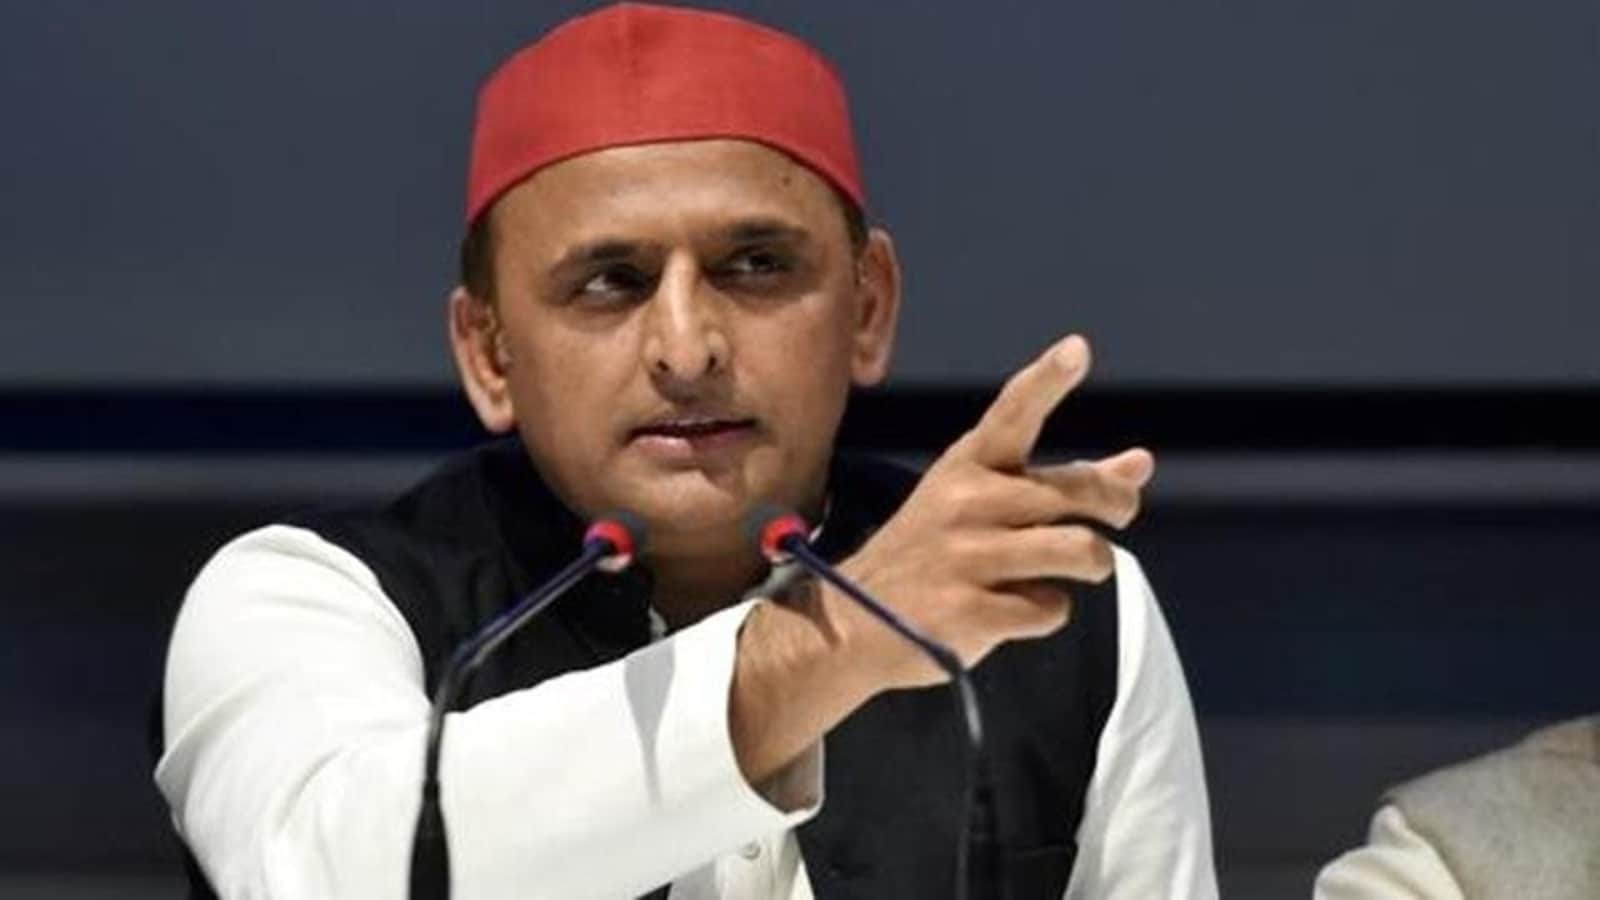 India's image 'tarnished' due to Centre's Covid 'mismanagement': Akhilesh  Yadav | Hindustan Times